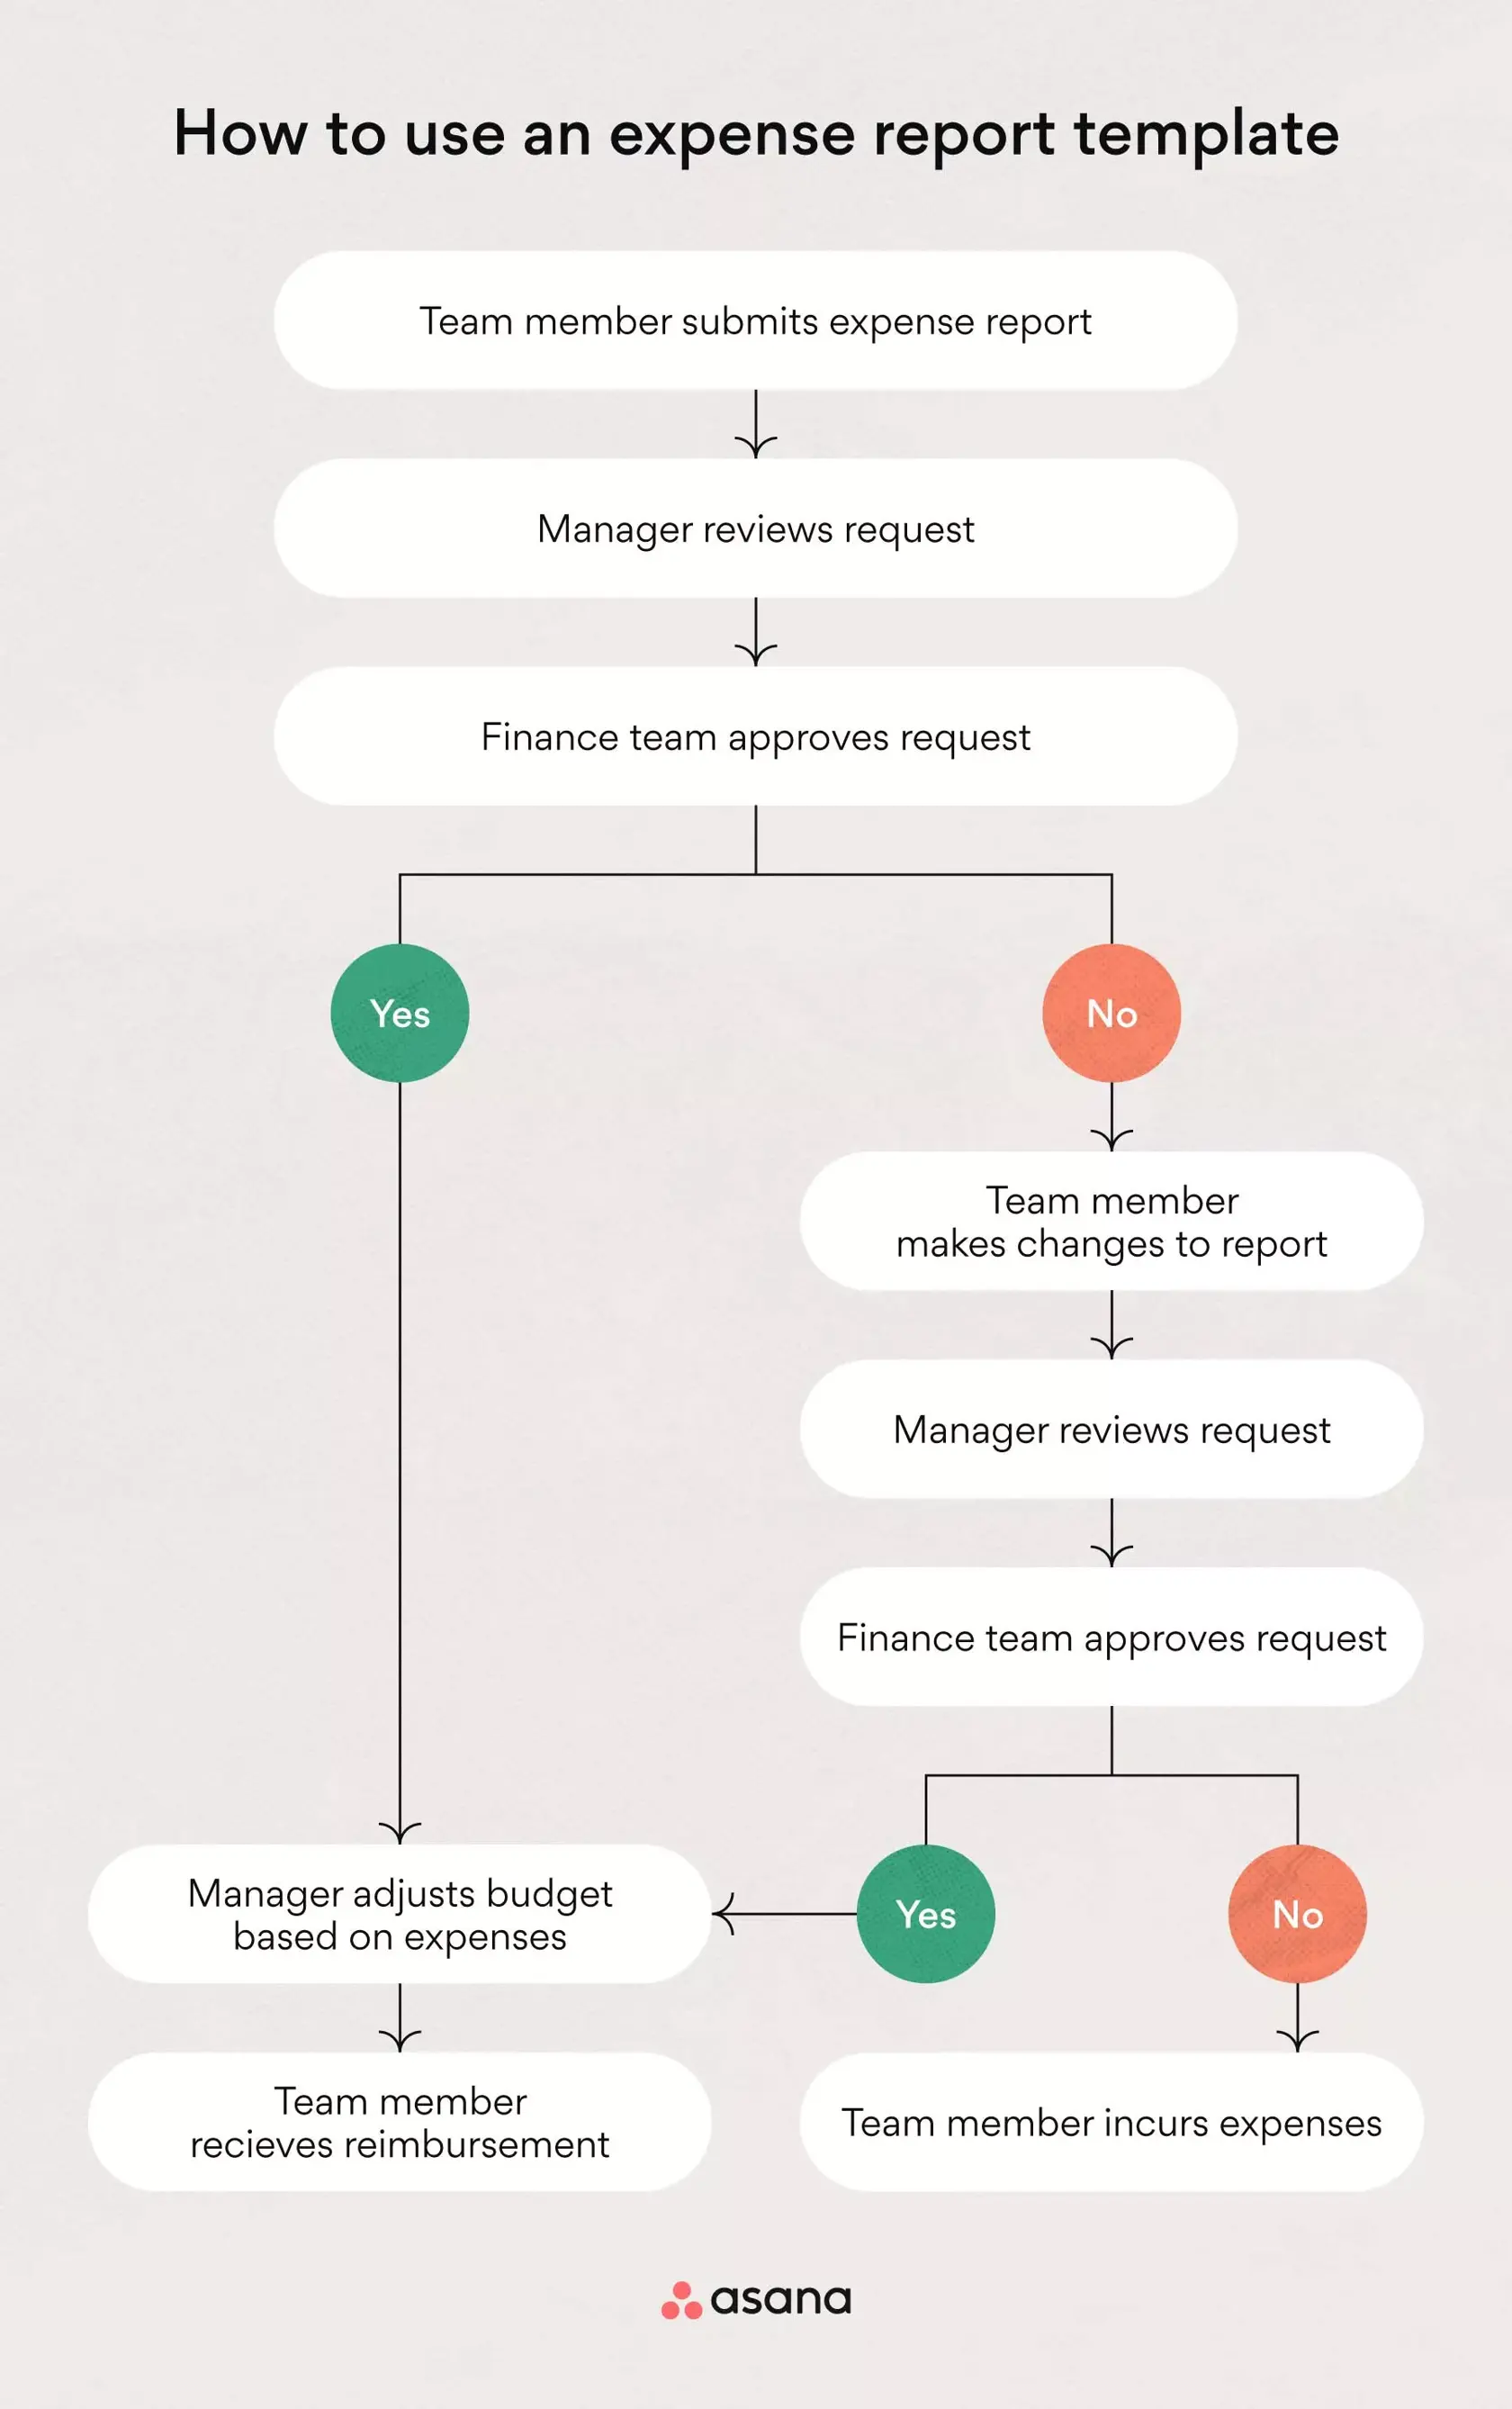 [inline illustration] how to use an expense report template (infographic)